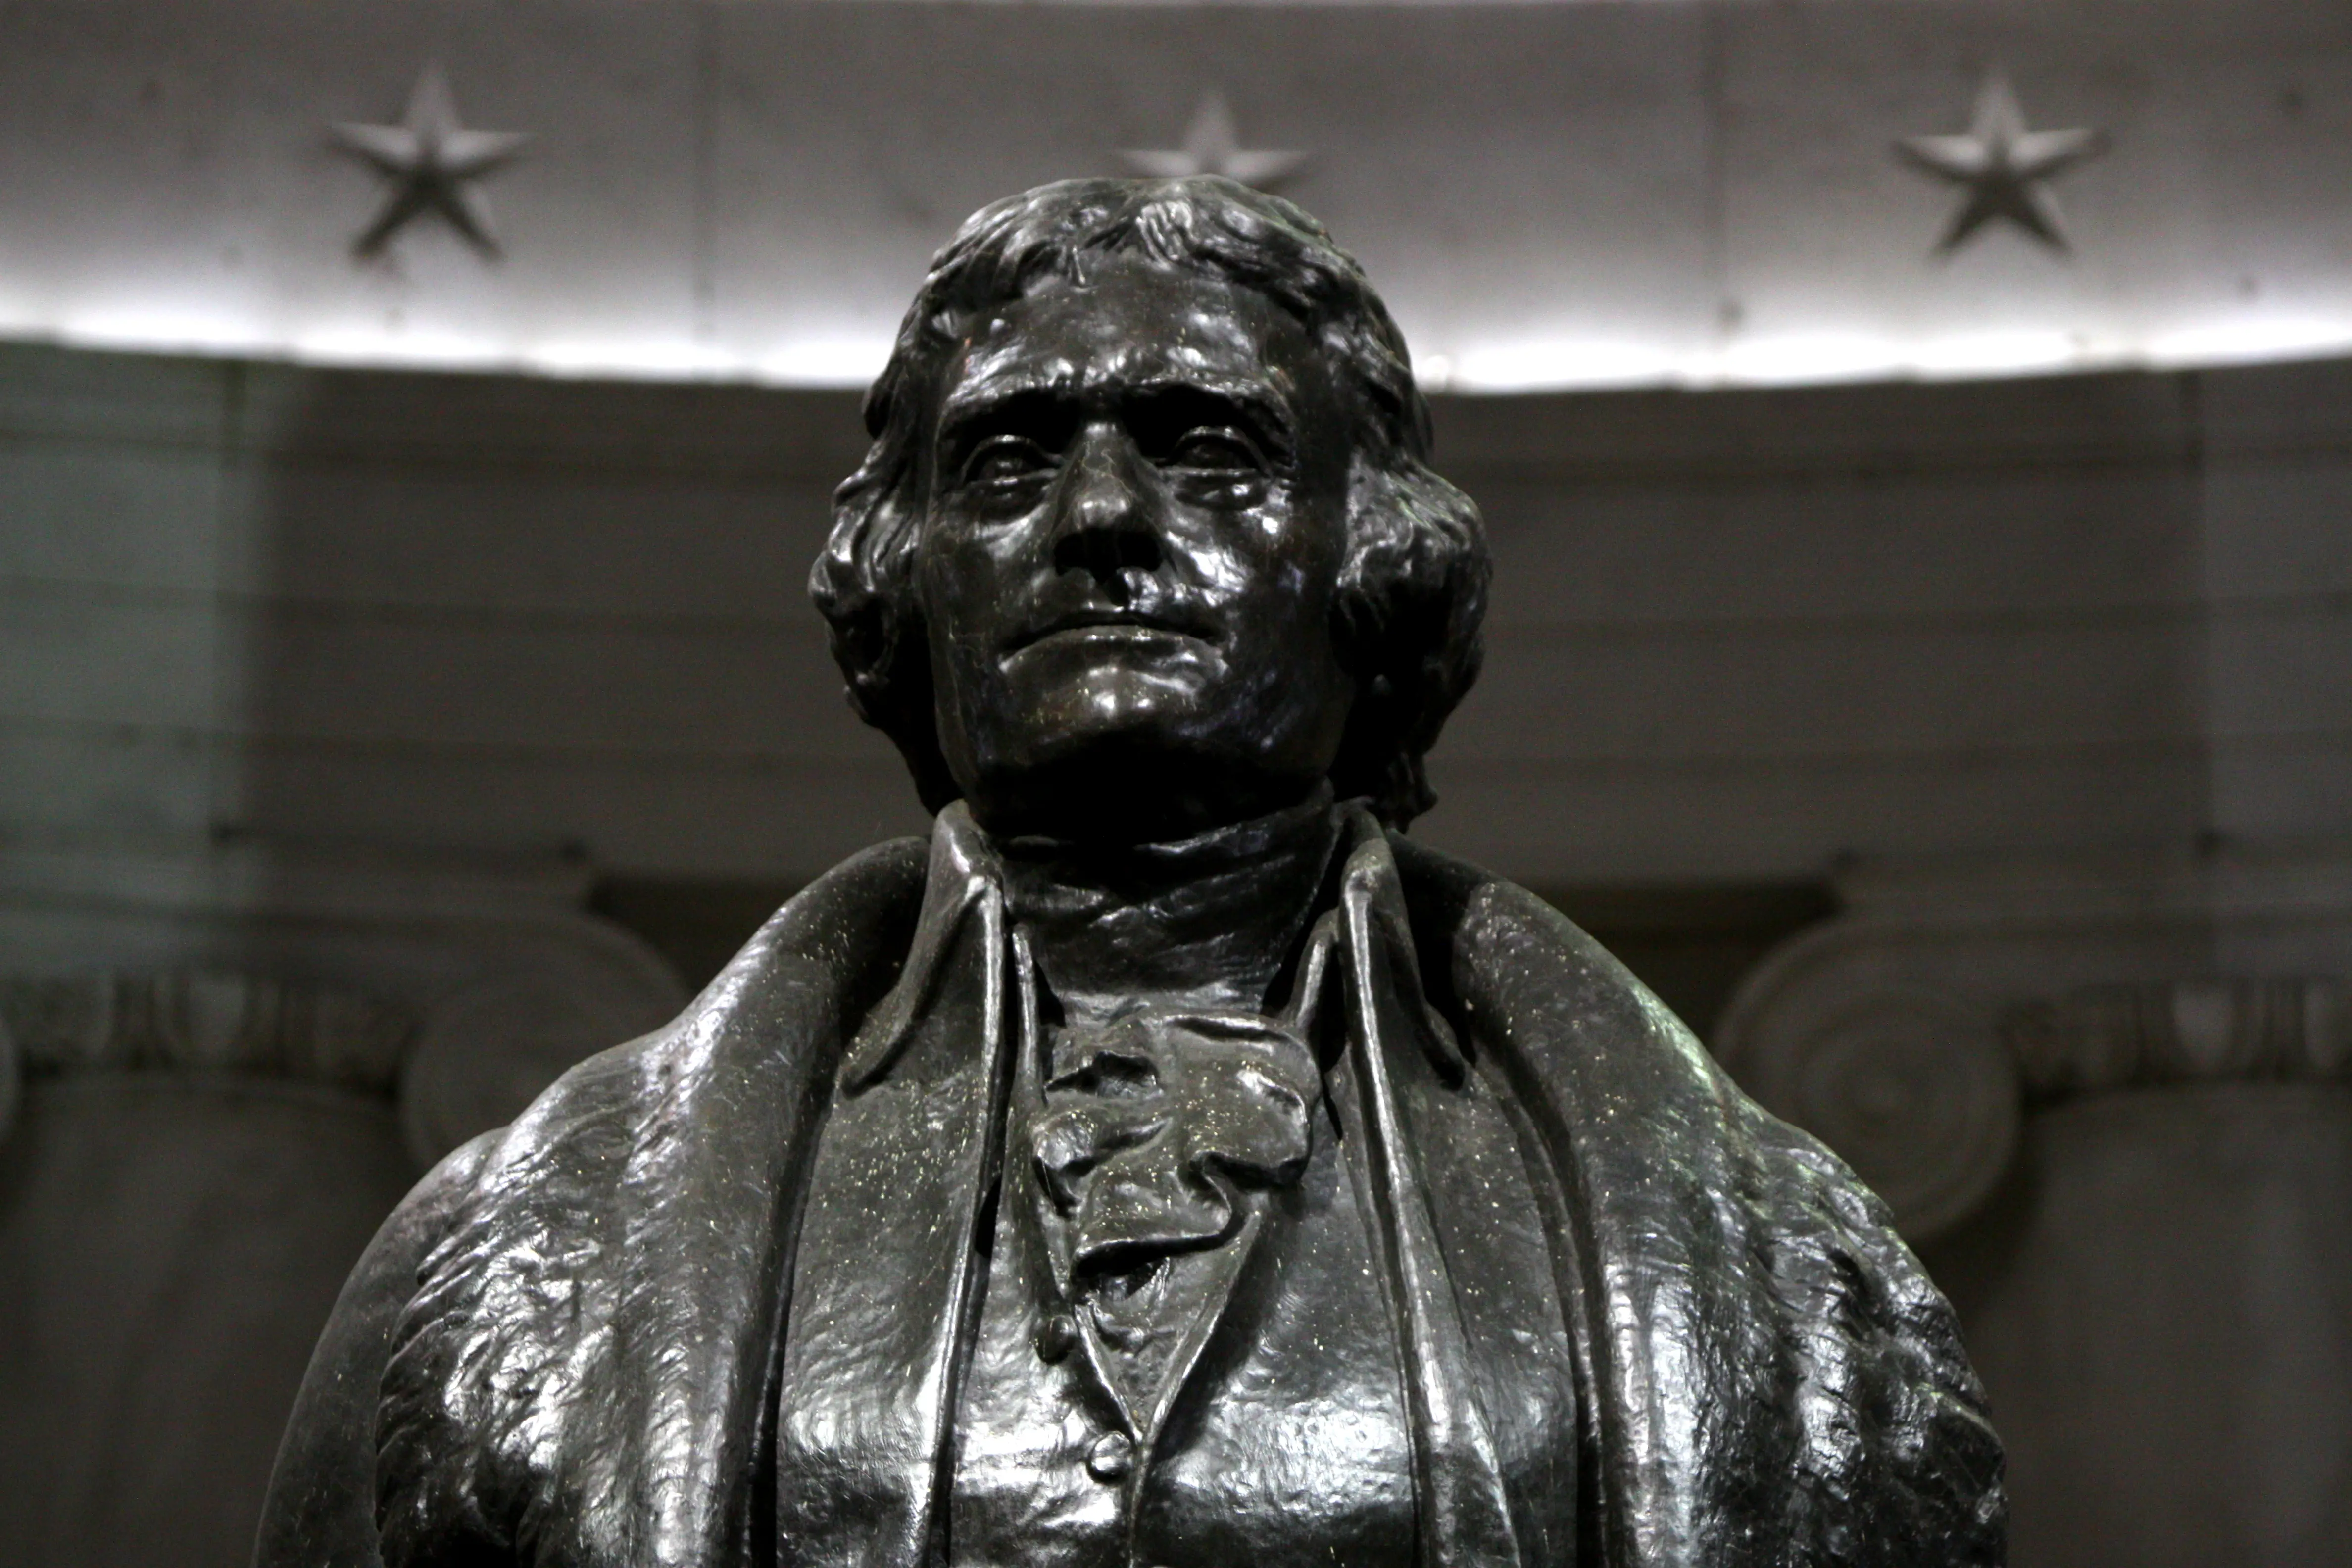 10 Interesting Facts About Thomas Jefferson You Probably Didn’t Know Before